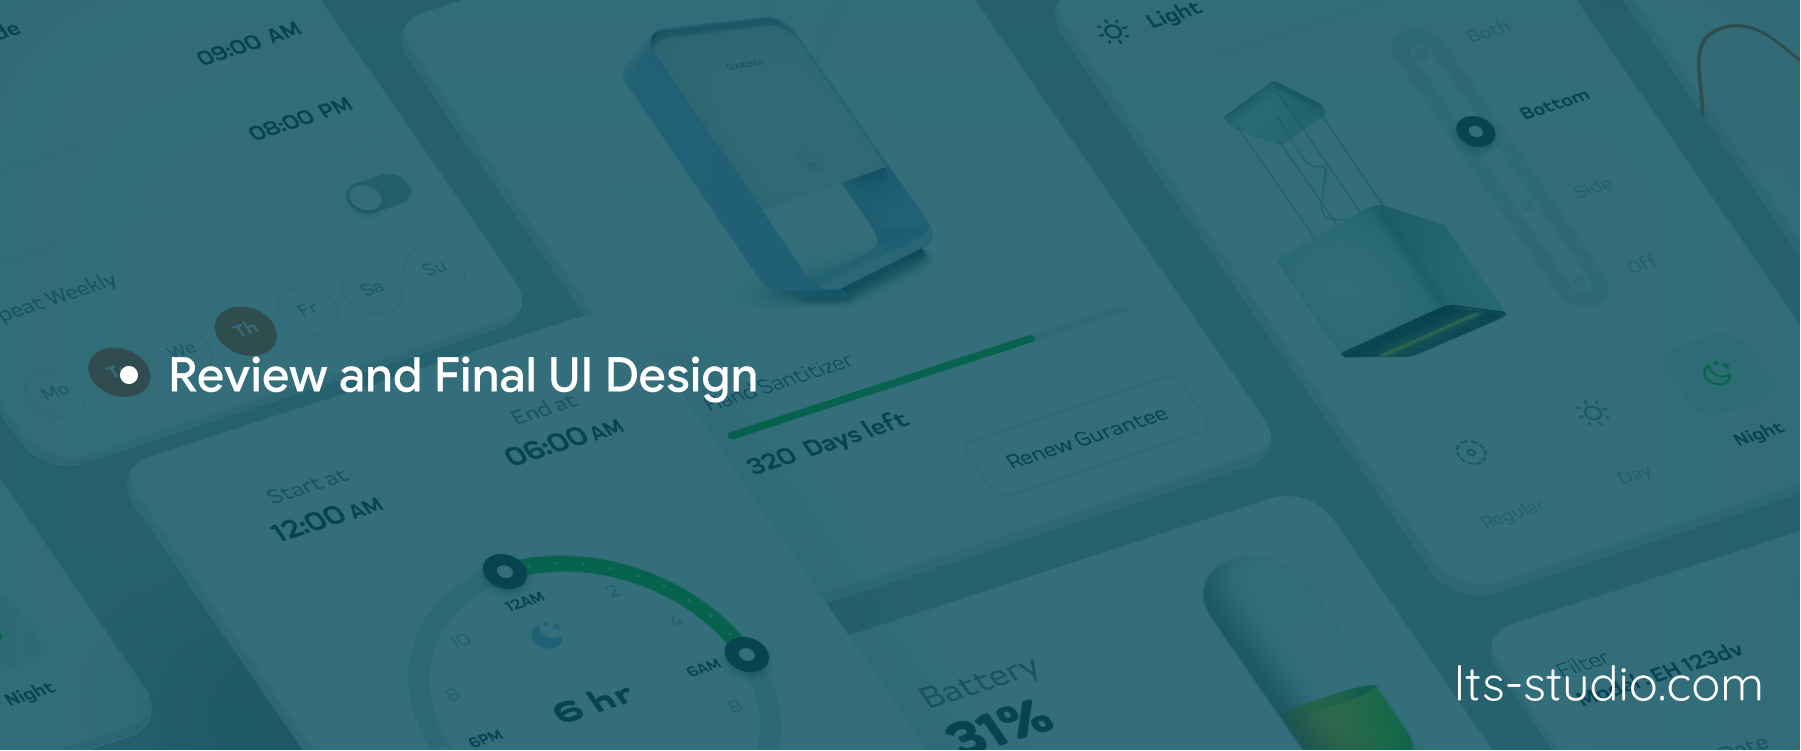 06-Review-And-Final-UI-Design